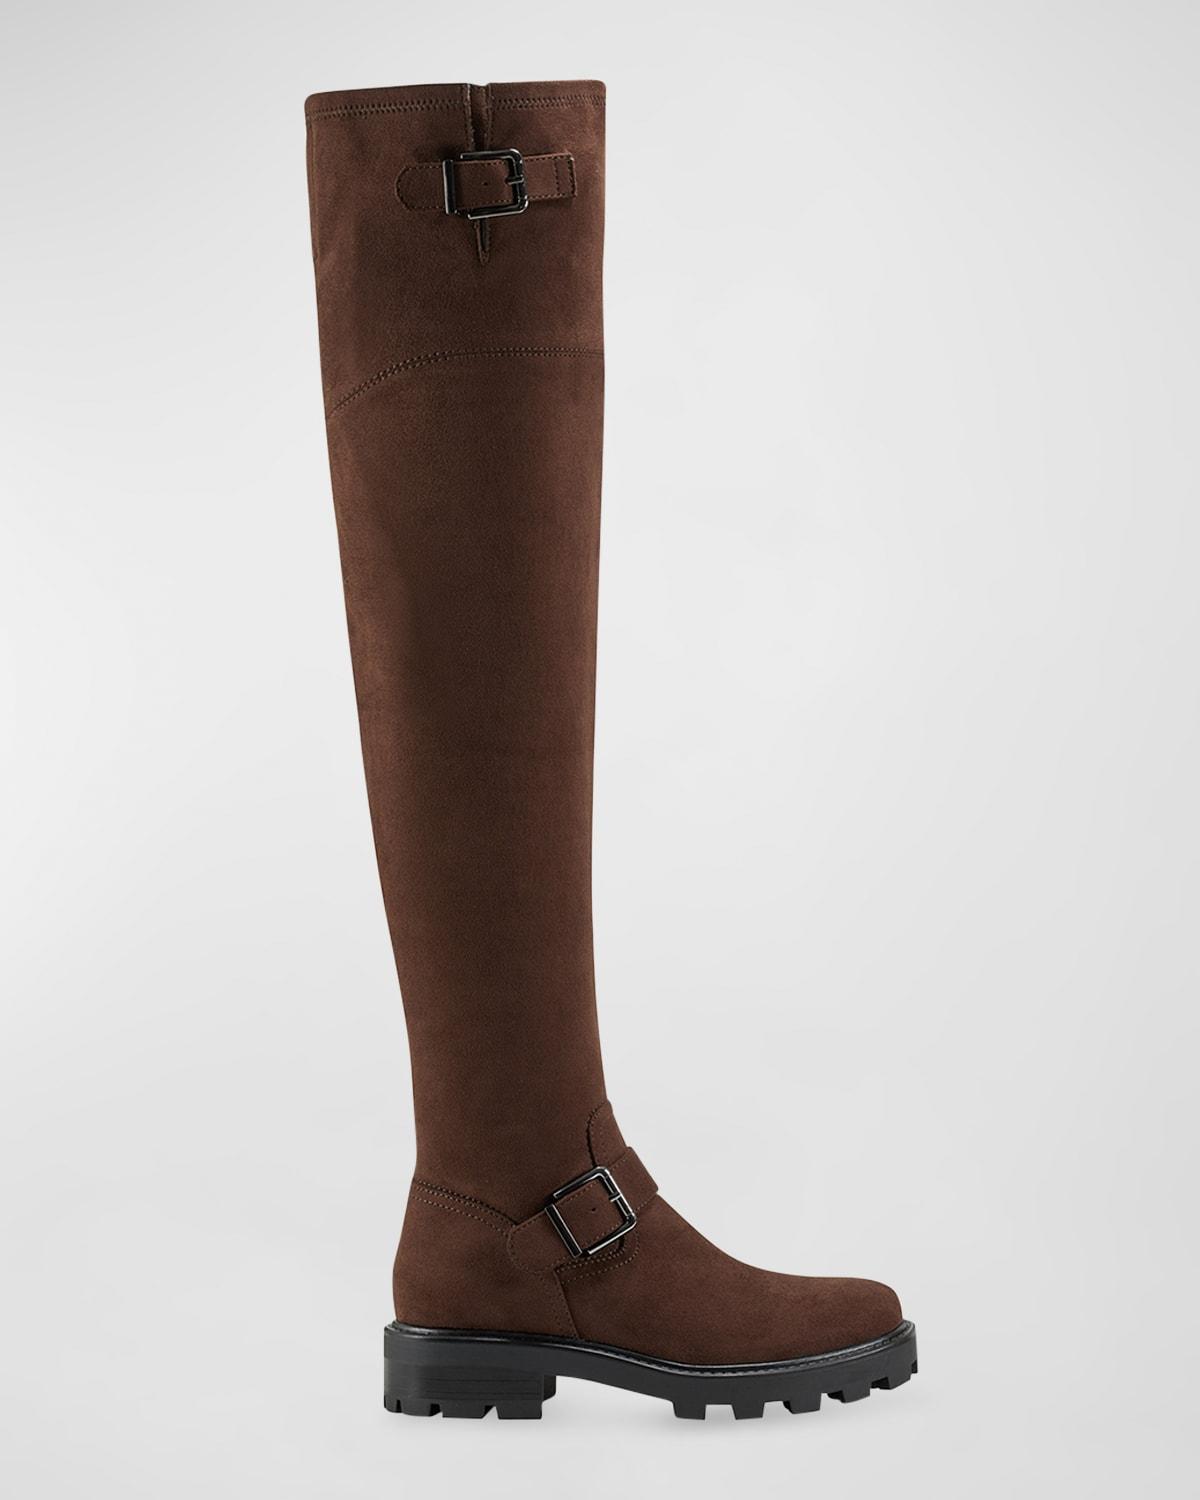 Marc Fisher LTD Ganven Lug Sole Over the Knee Boot Product Image